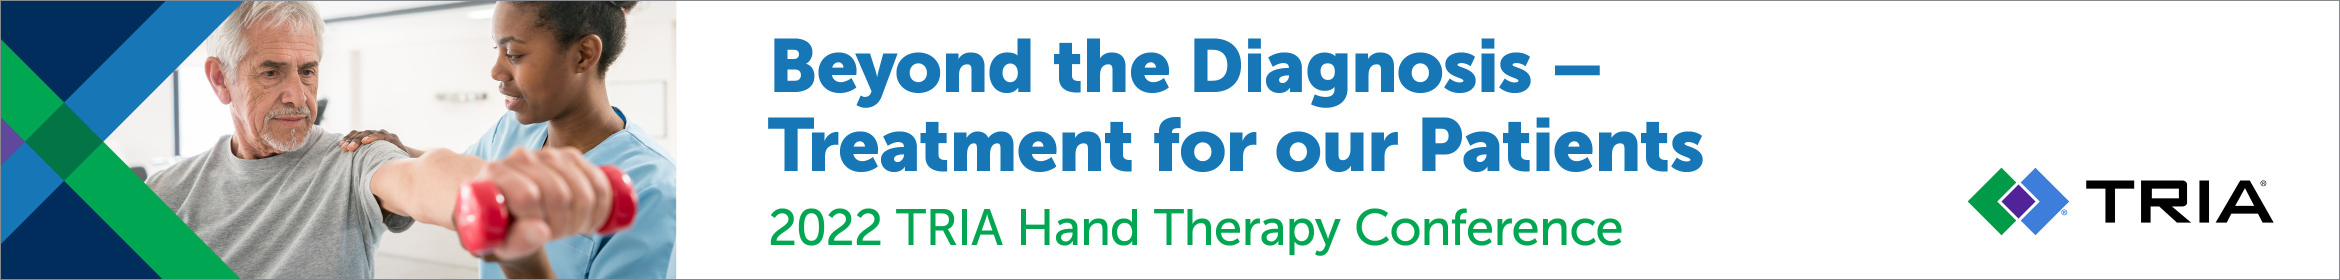 Hand Therapy 2022 Main banner